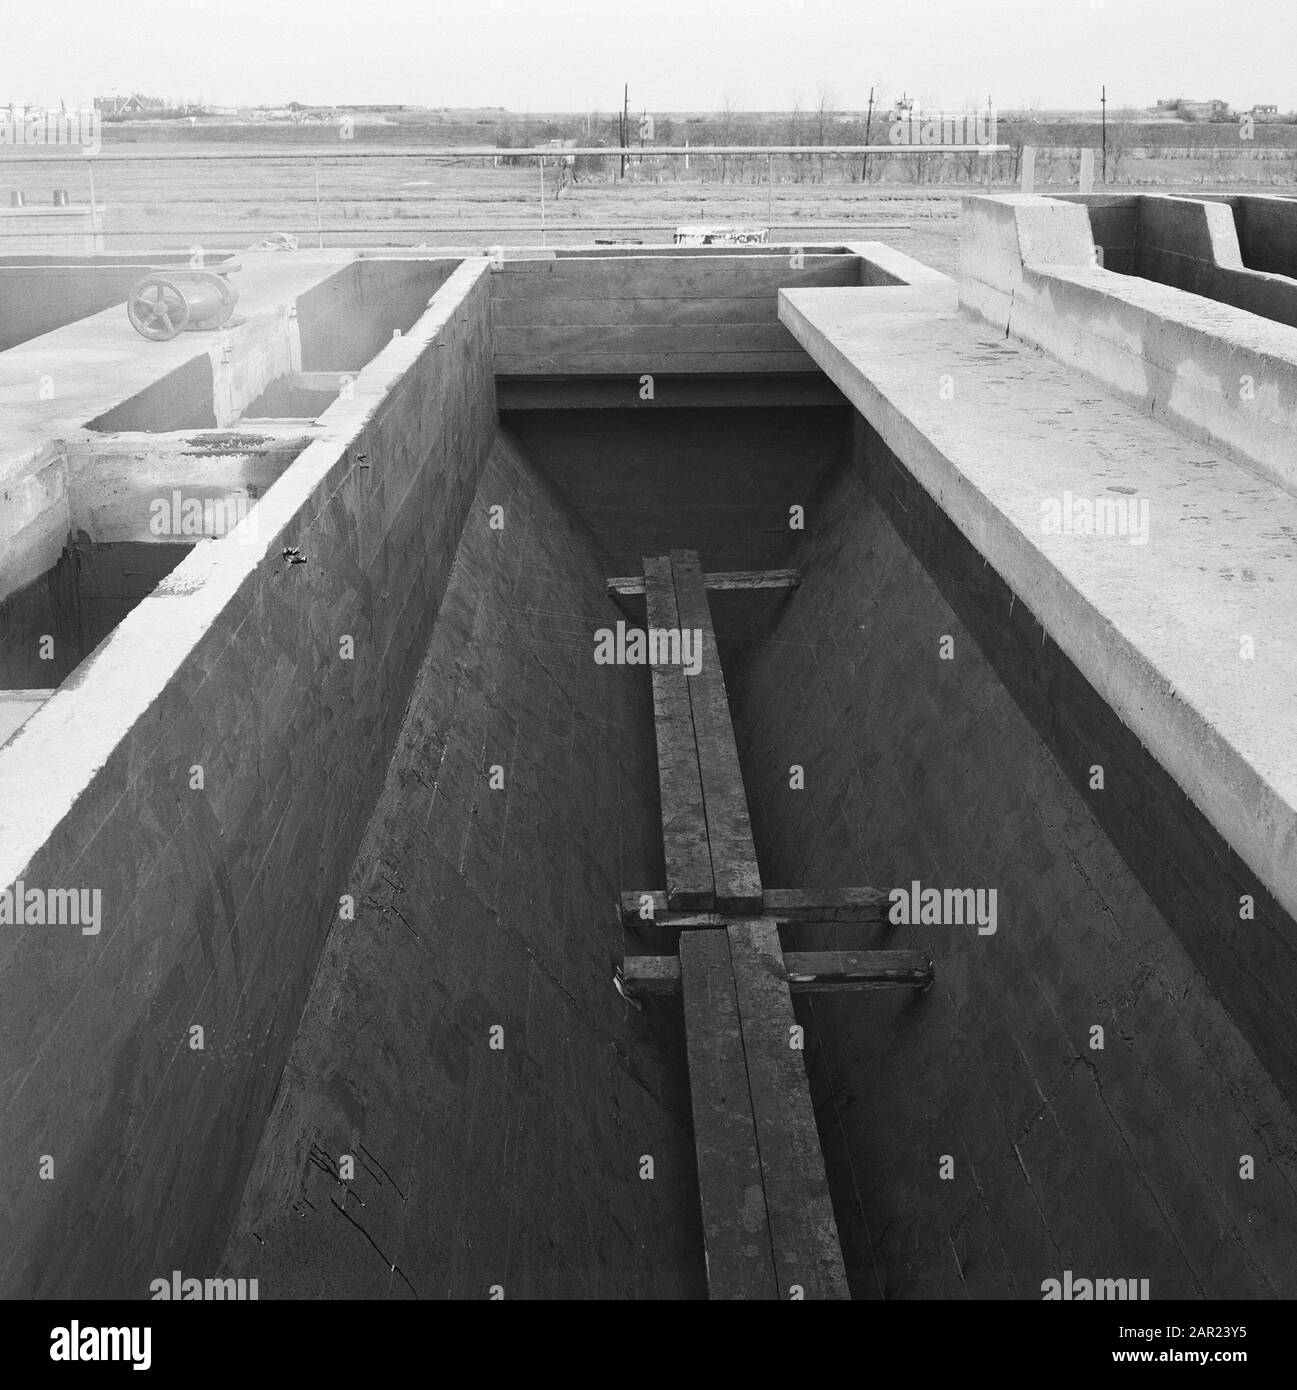 cleaning wastewater, treatment of urban waste, sewage treatment plants, imhoff-tank Date: 1965 Location: Den Oever Keywords: cleaning wastewater, sewage treatment plants, processing urban waste person name: imhoff-tank Stock Photo